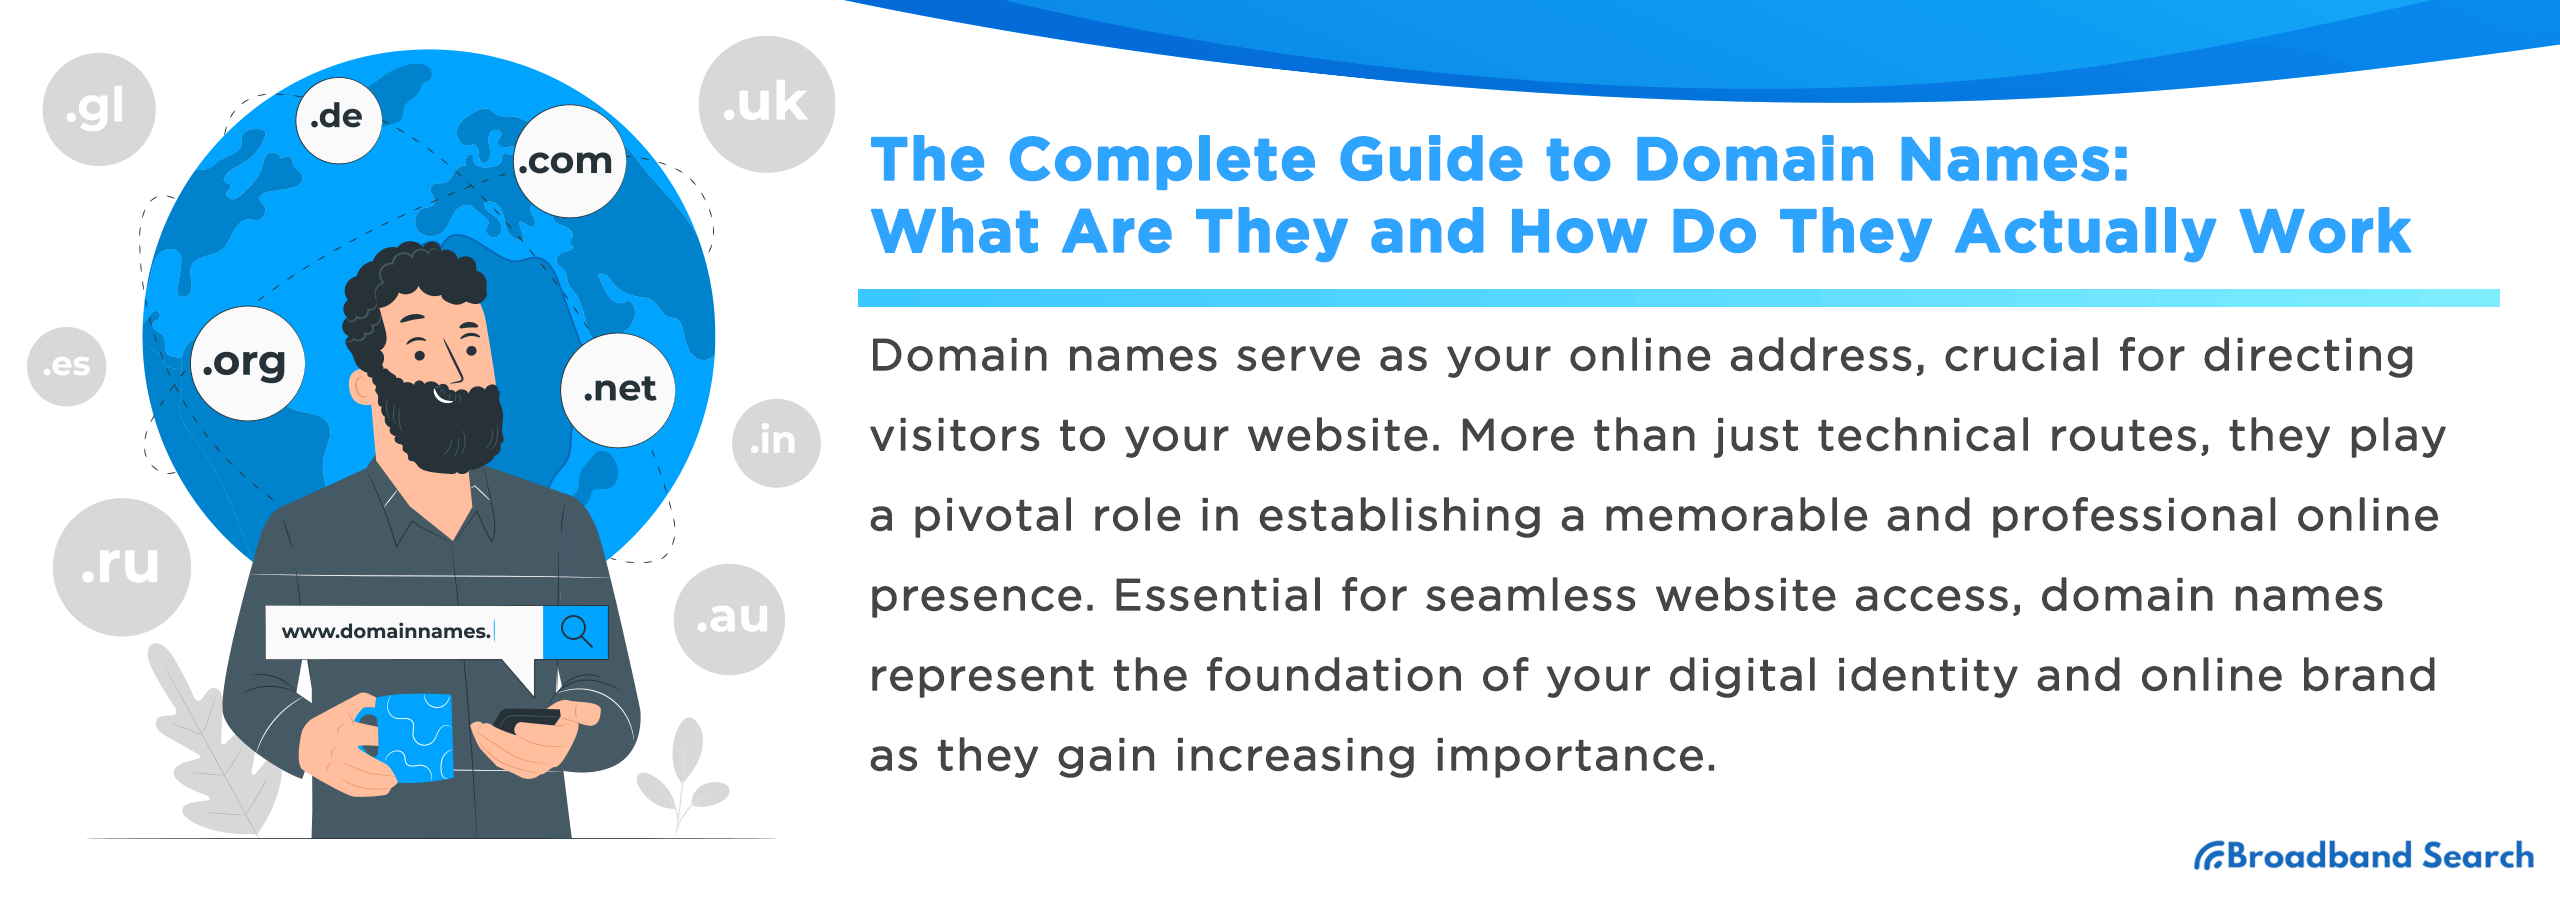 The Complete Guide to Domain Names: What Are They and How Do They Actually Work